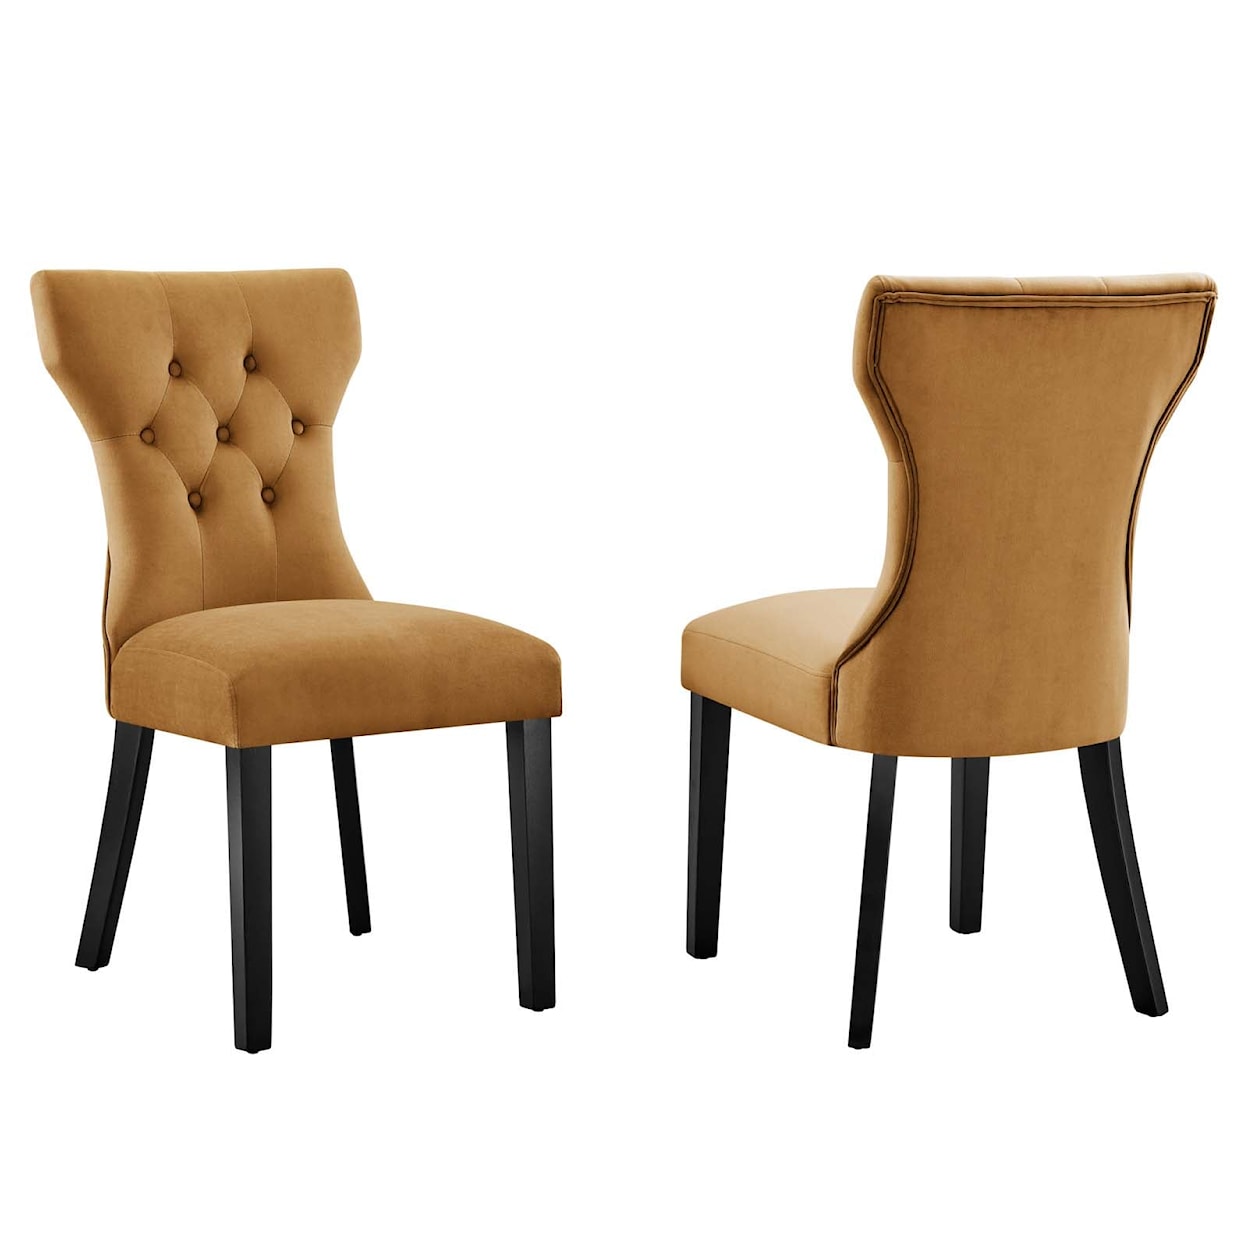 Modway Silhouette Silhouette Velvet Dining Chairs - Set of 2